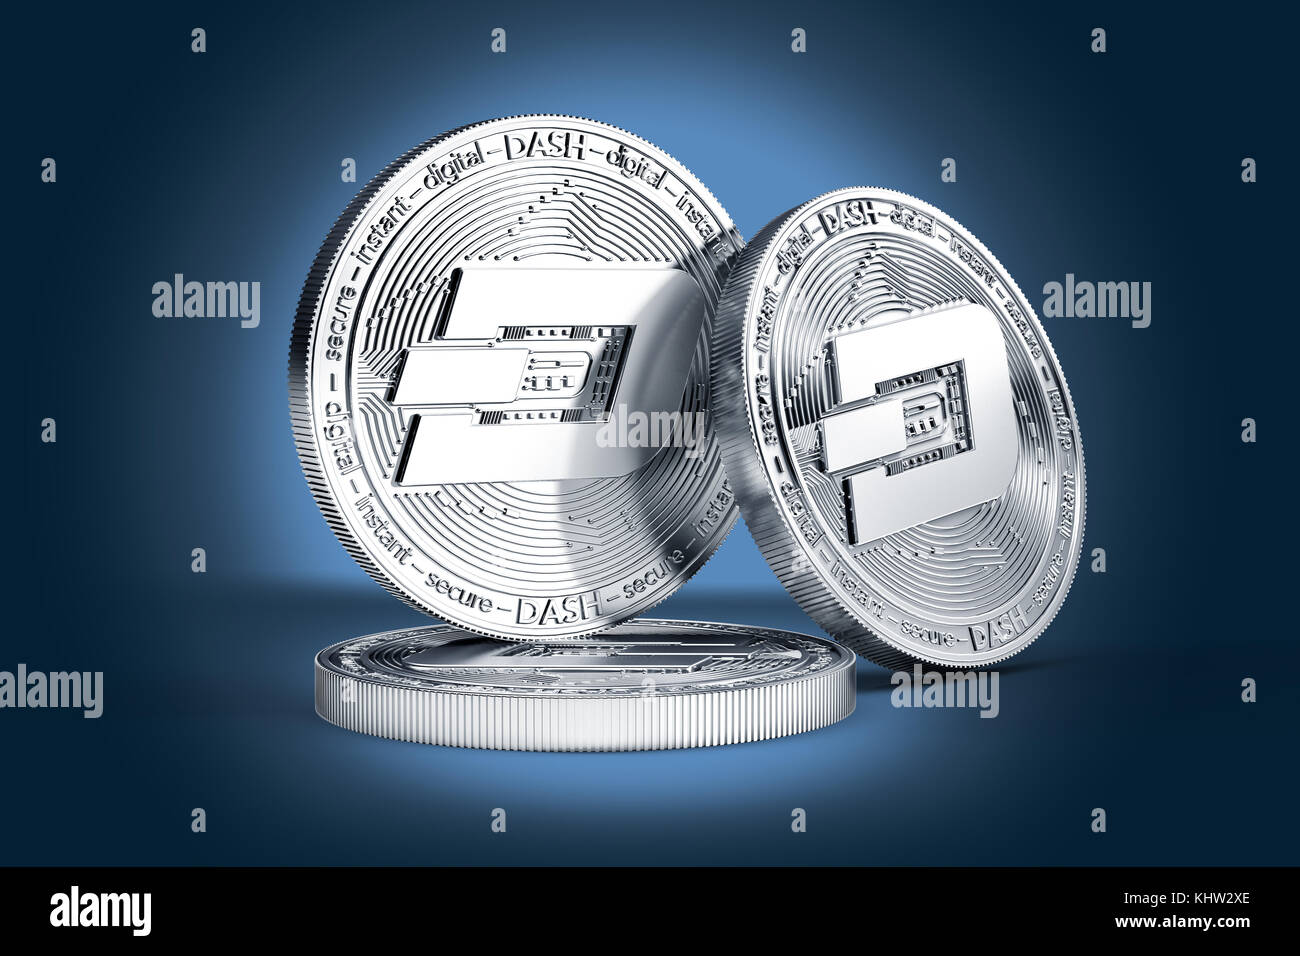 Three Dash concept physical coins displayed on gently lit dark blue background. 3D rendering. New virtual money Stock Photo